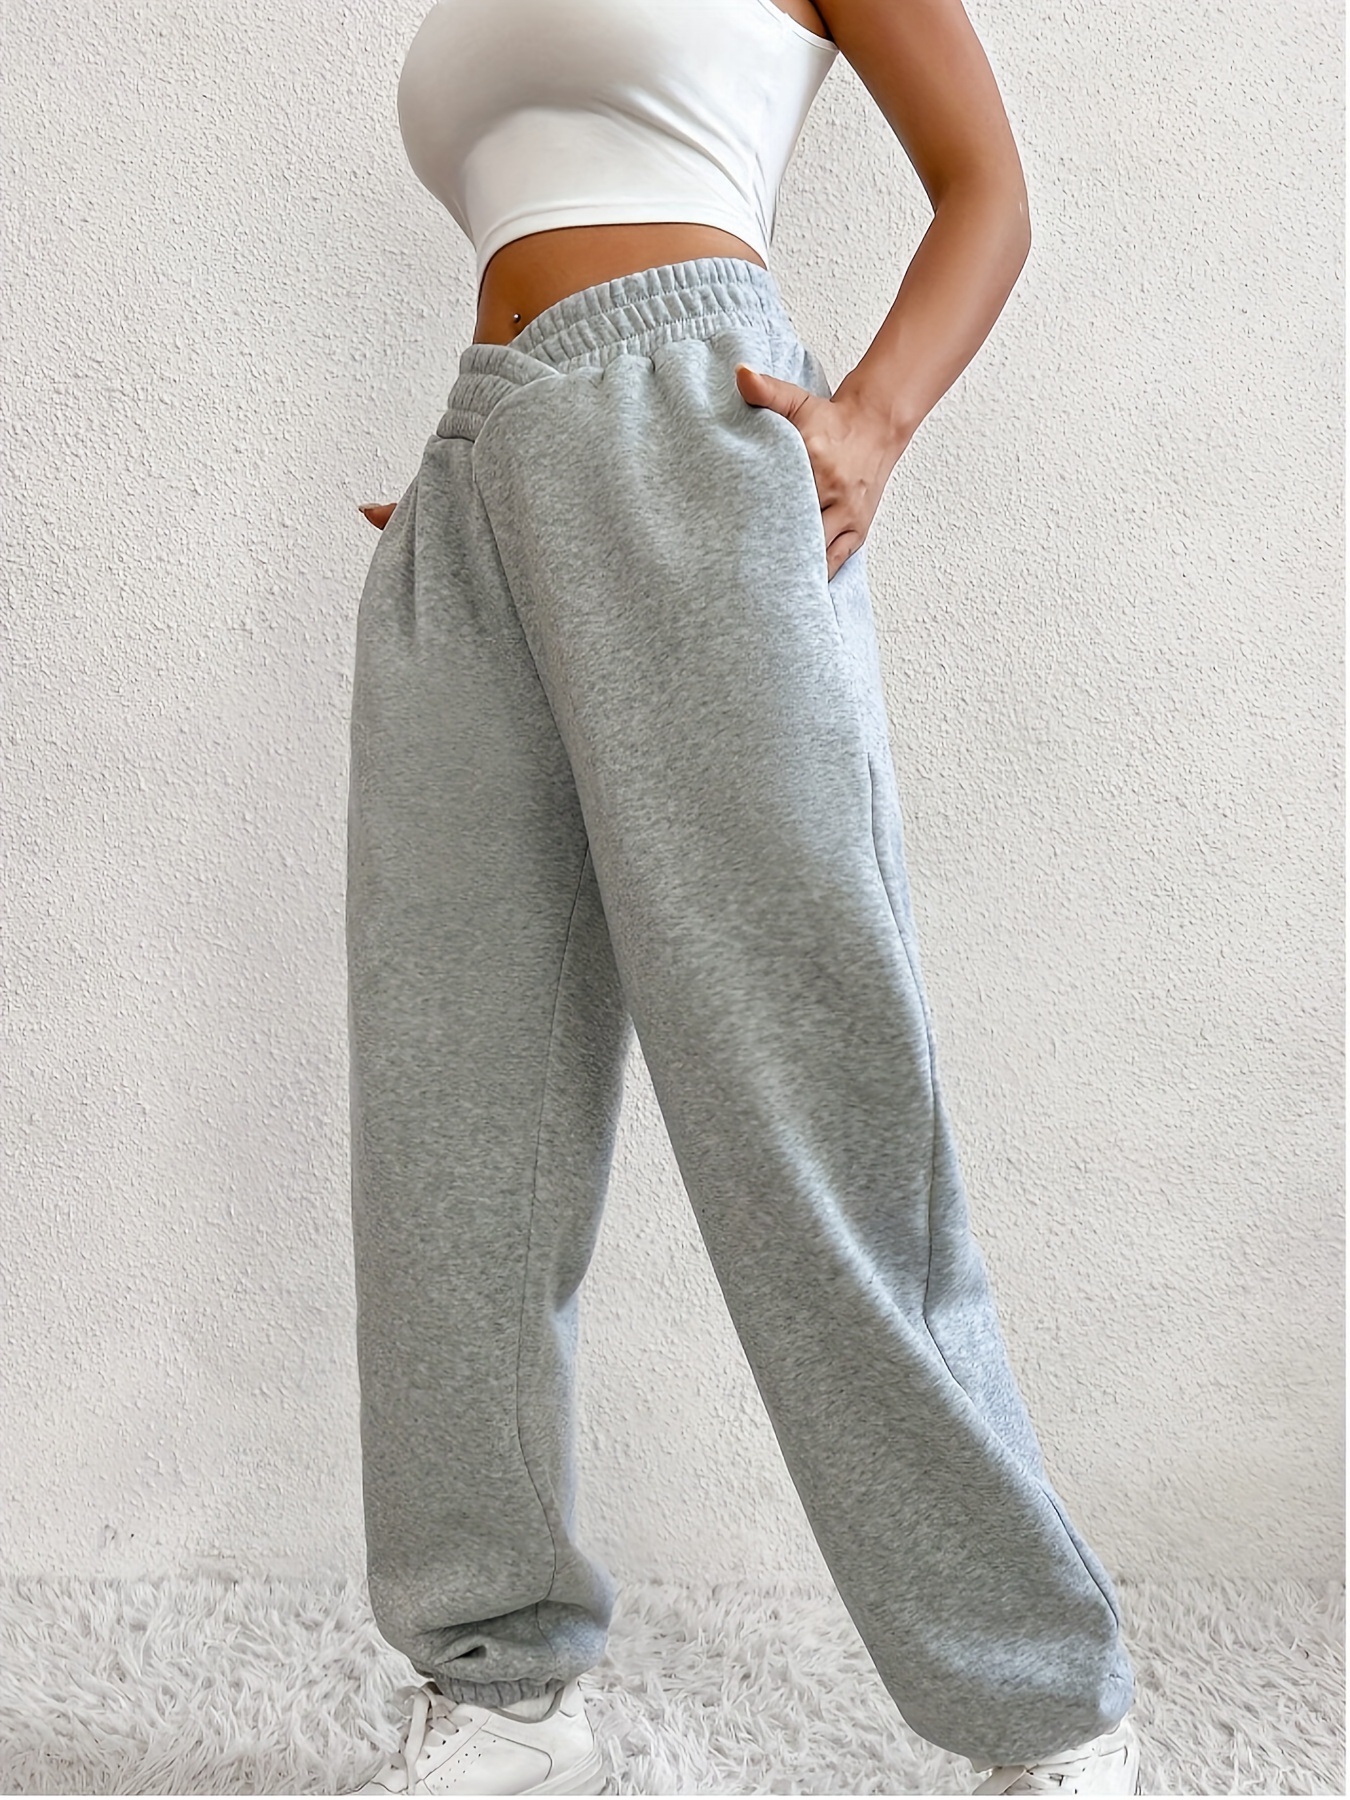 Solid Loose Basic Jogger Sweatpants, Versatile Comfy Pants For Fall & Winter, Women's Clothing